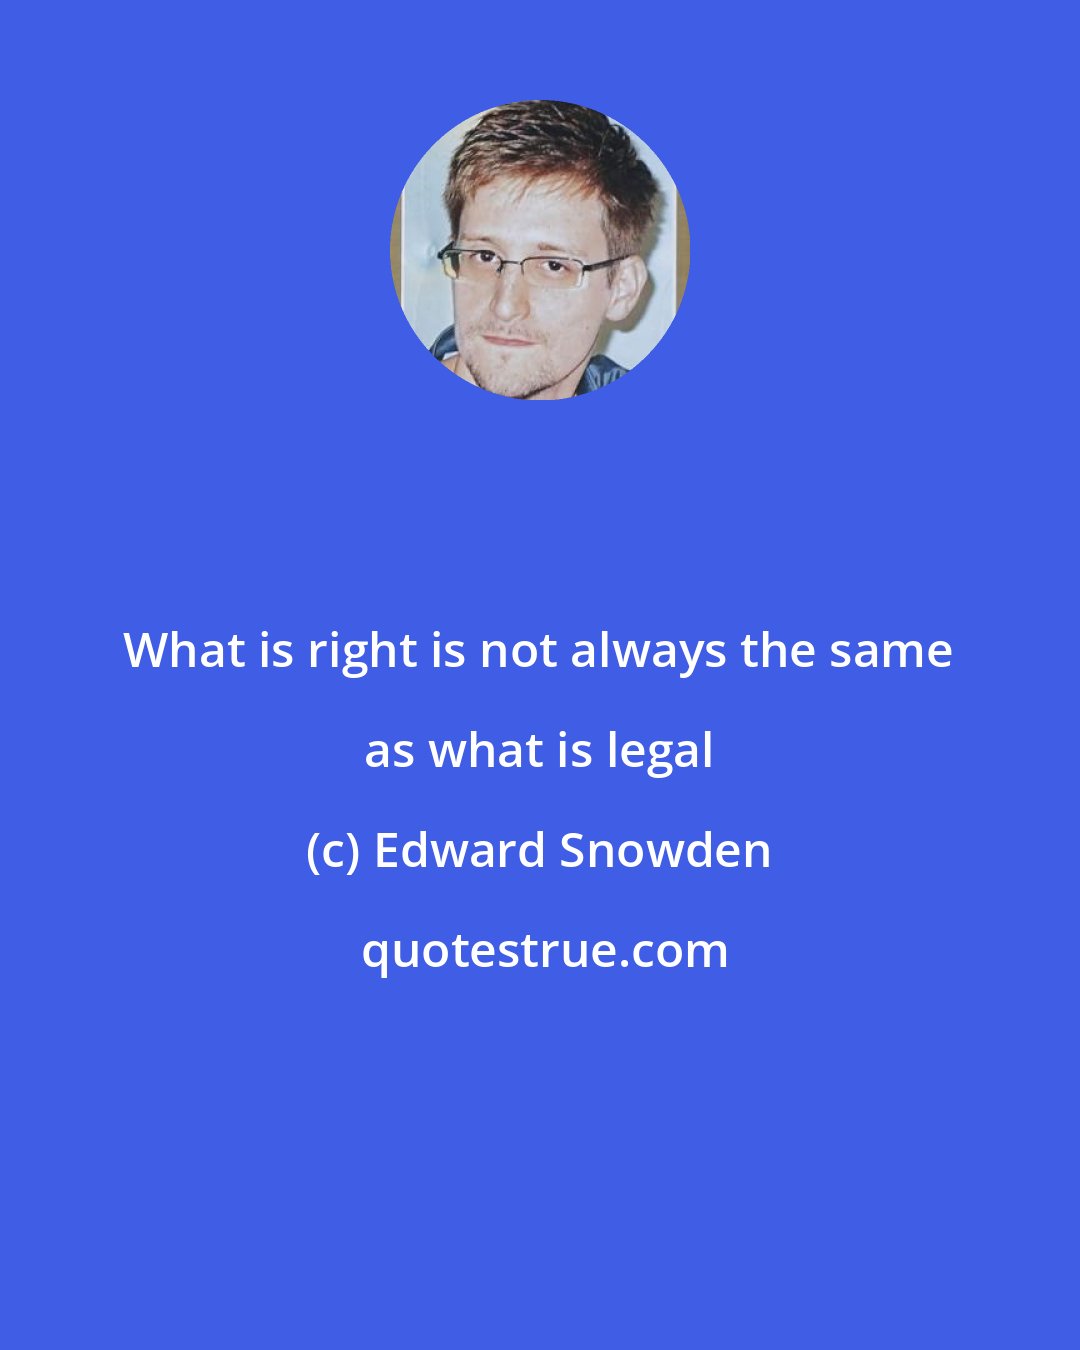 Edward Snowden: What is right is not always the same as what is legal